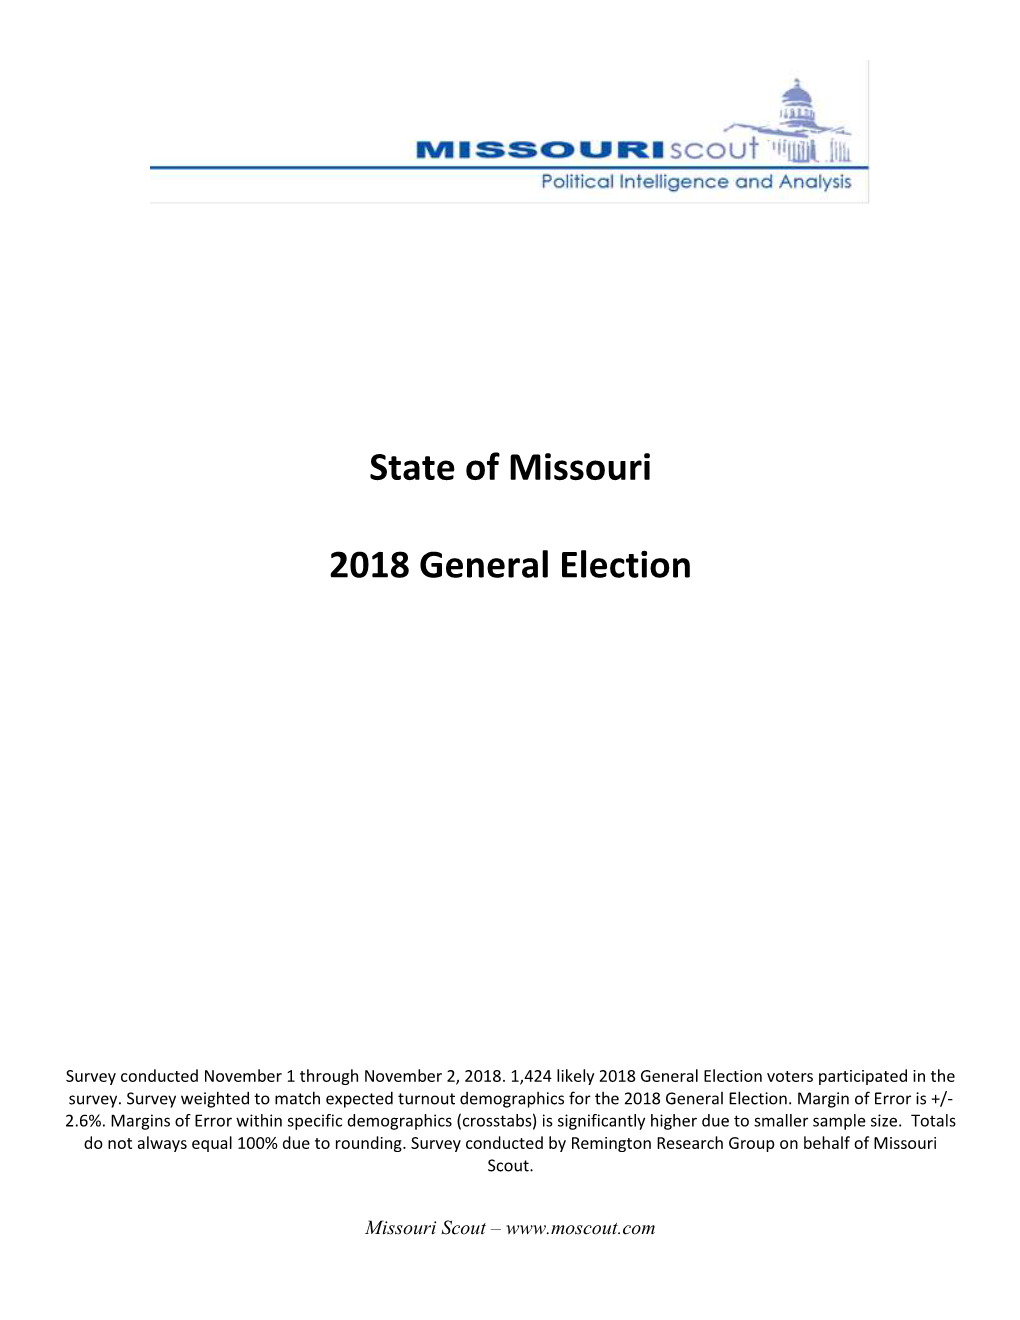 State of Missouri 2018 General Election